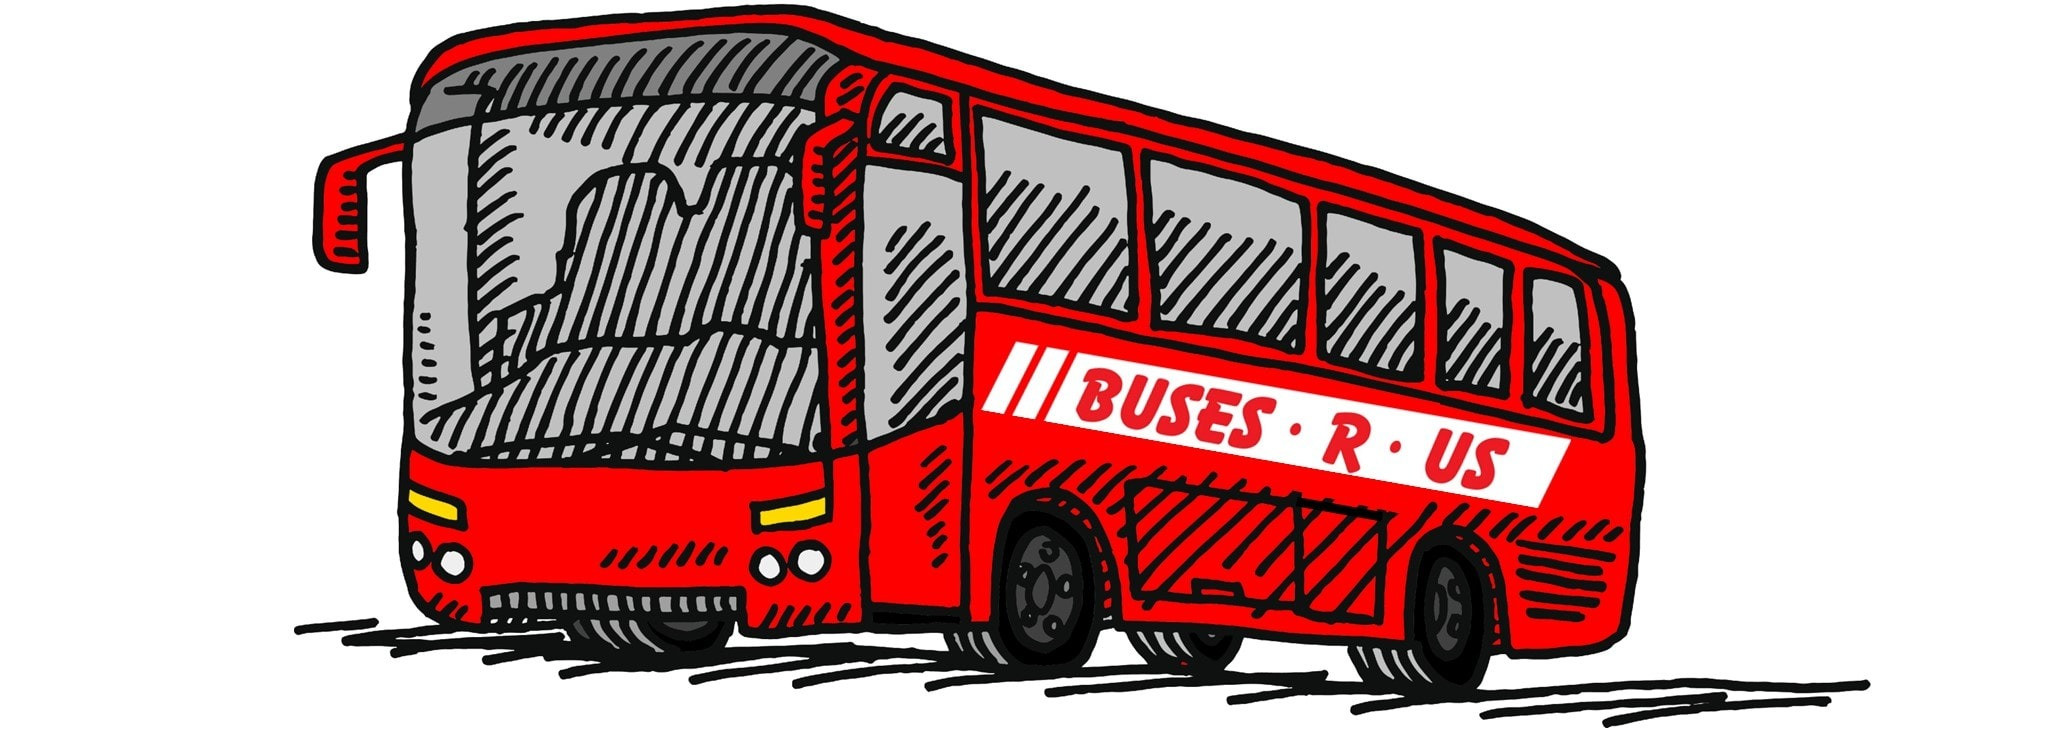 Buses R Us Profile Picture